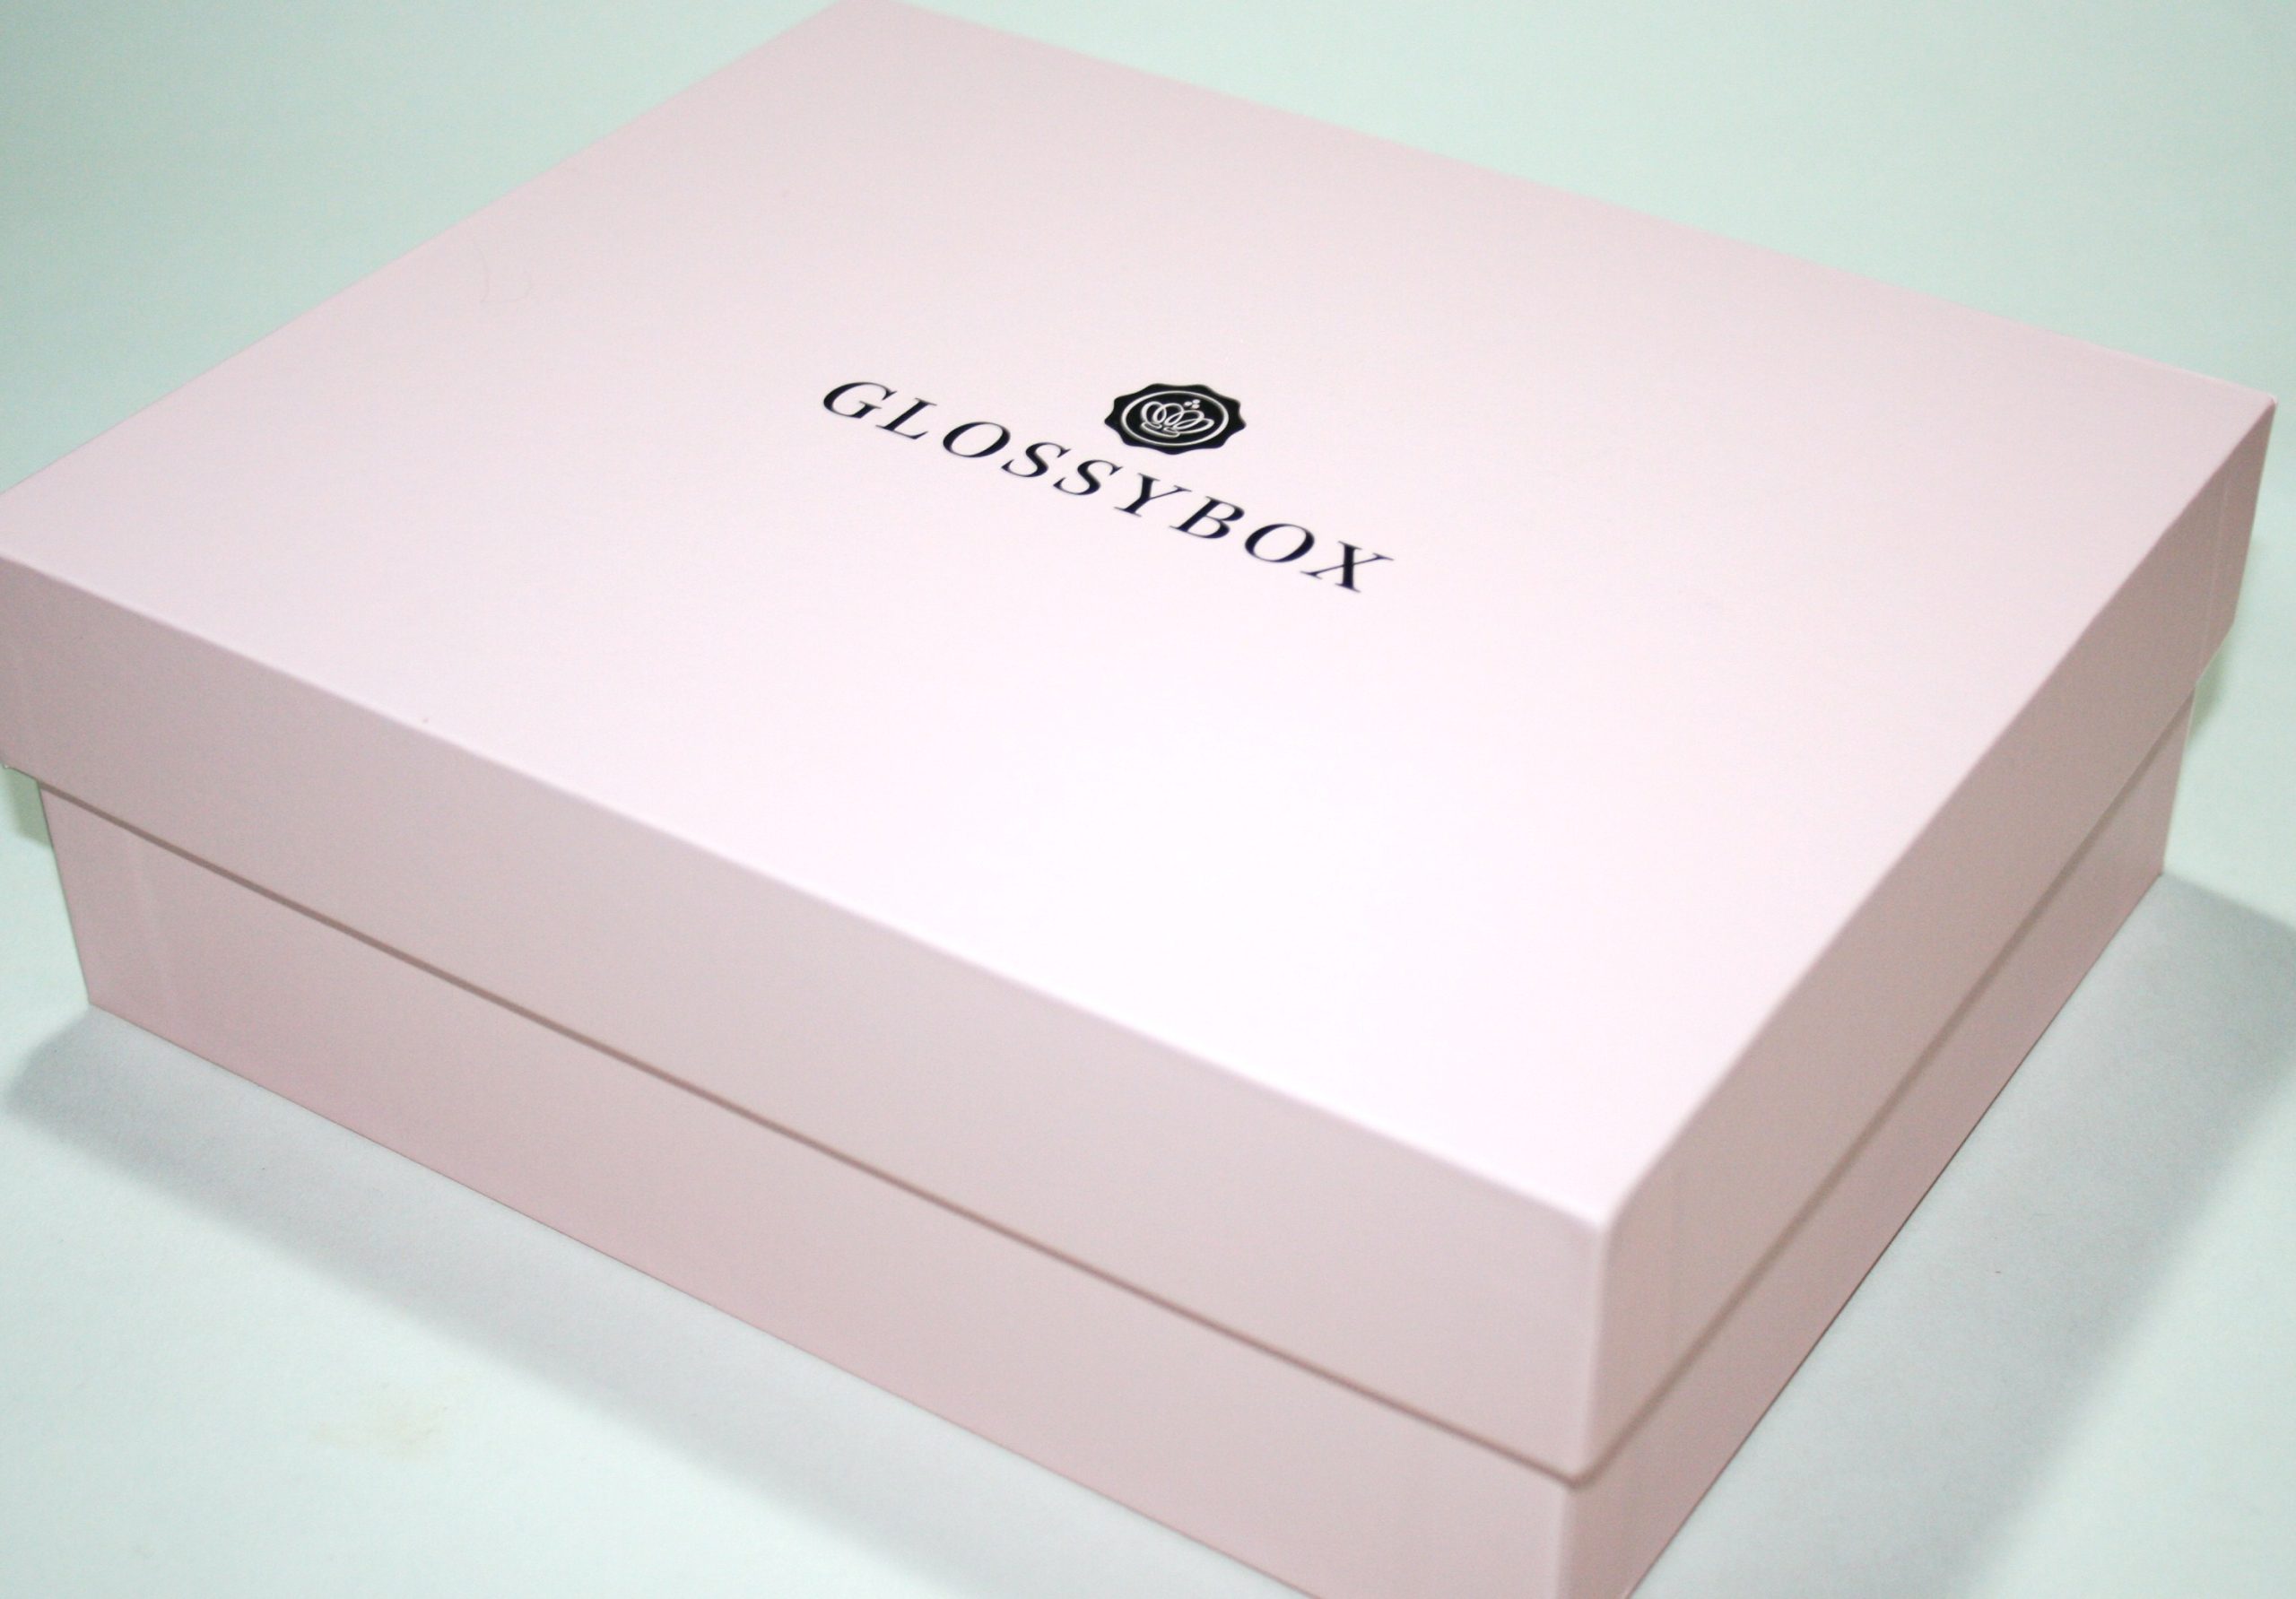 Glossybox March 2015